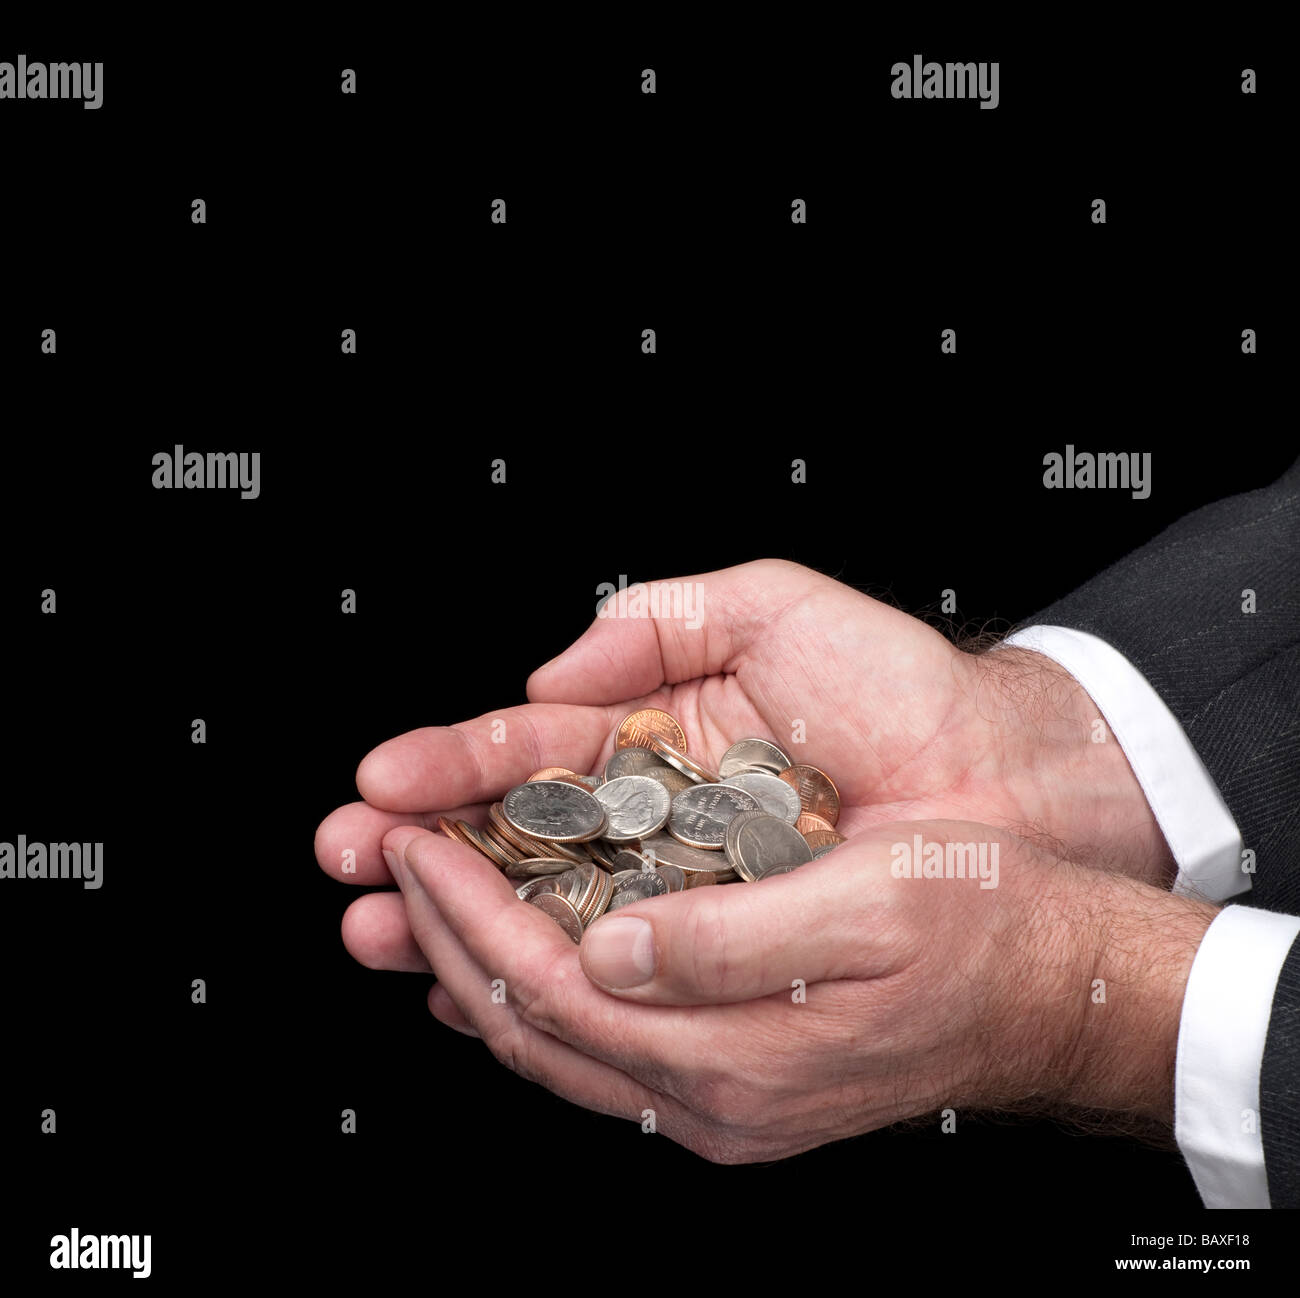 A man cups his hands as he holds a pile of coins Image was shot against a black backdrop and is not a cutout Stock Photo